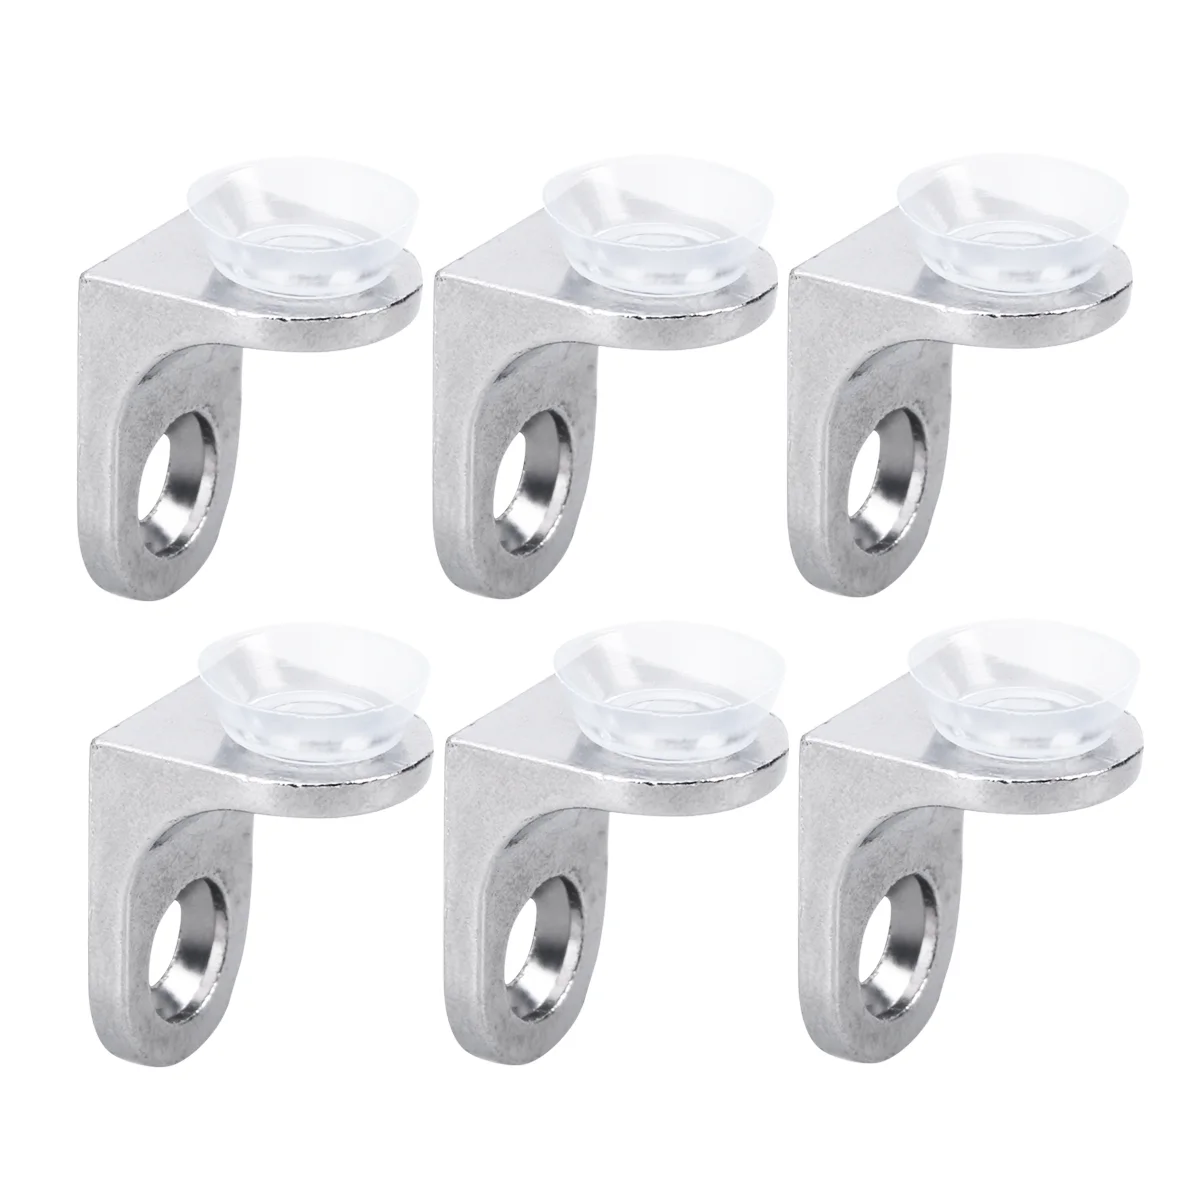 

20 PCS Wall Mount Shelf Brackets Shelves Floating Glass Mounting Brace Support Pegs Right Angle Mounted Stand